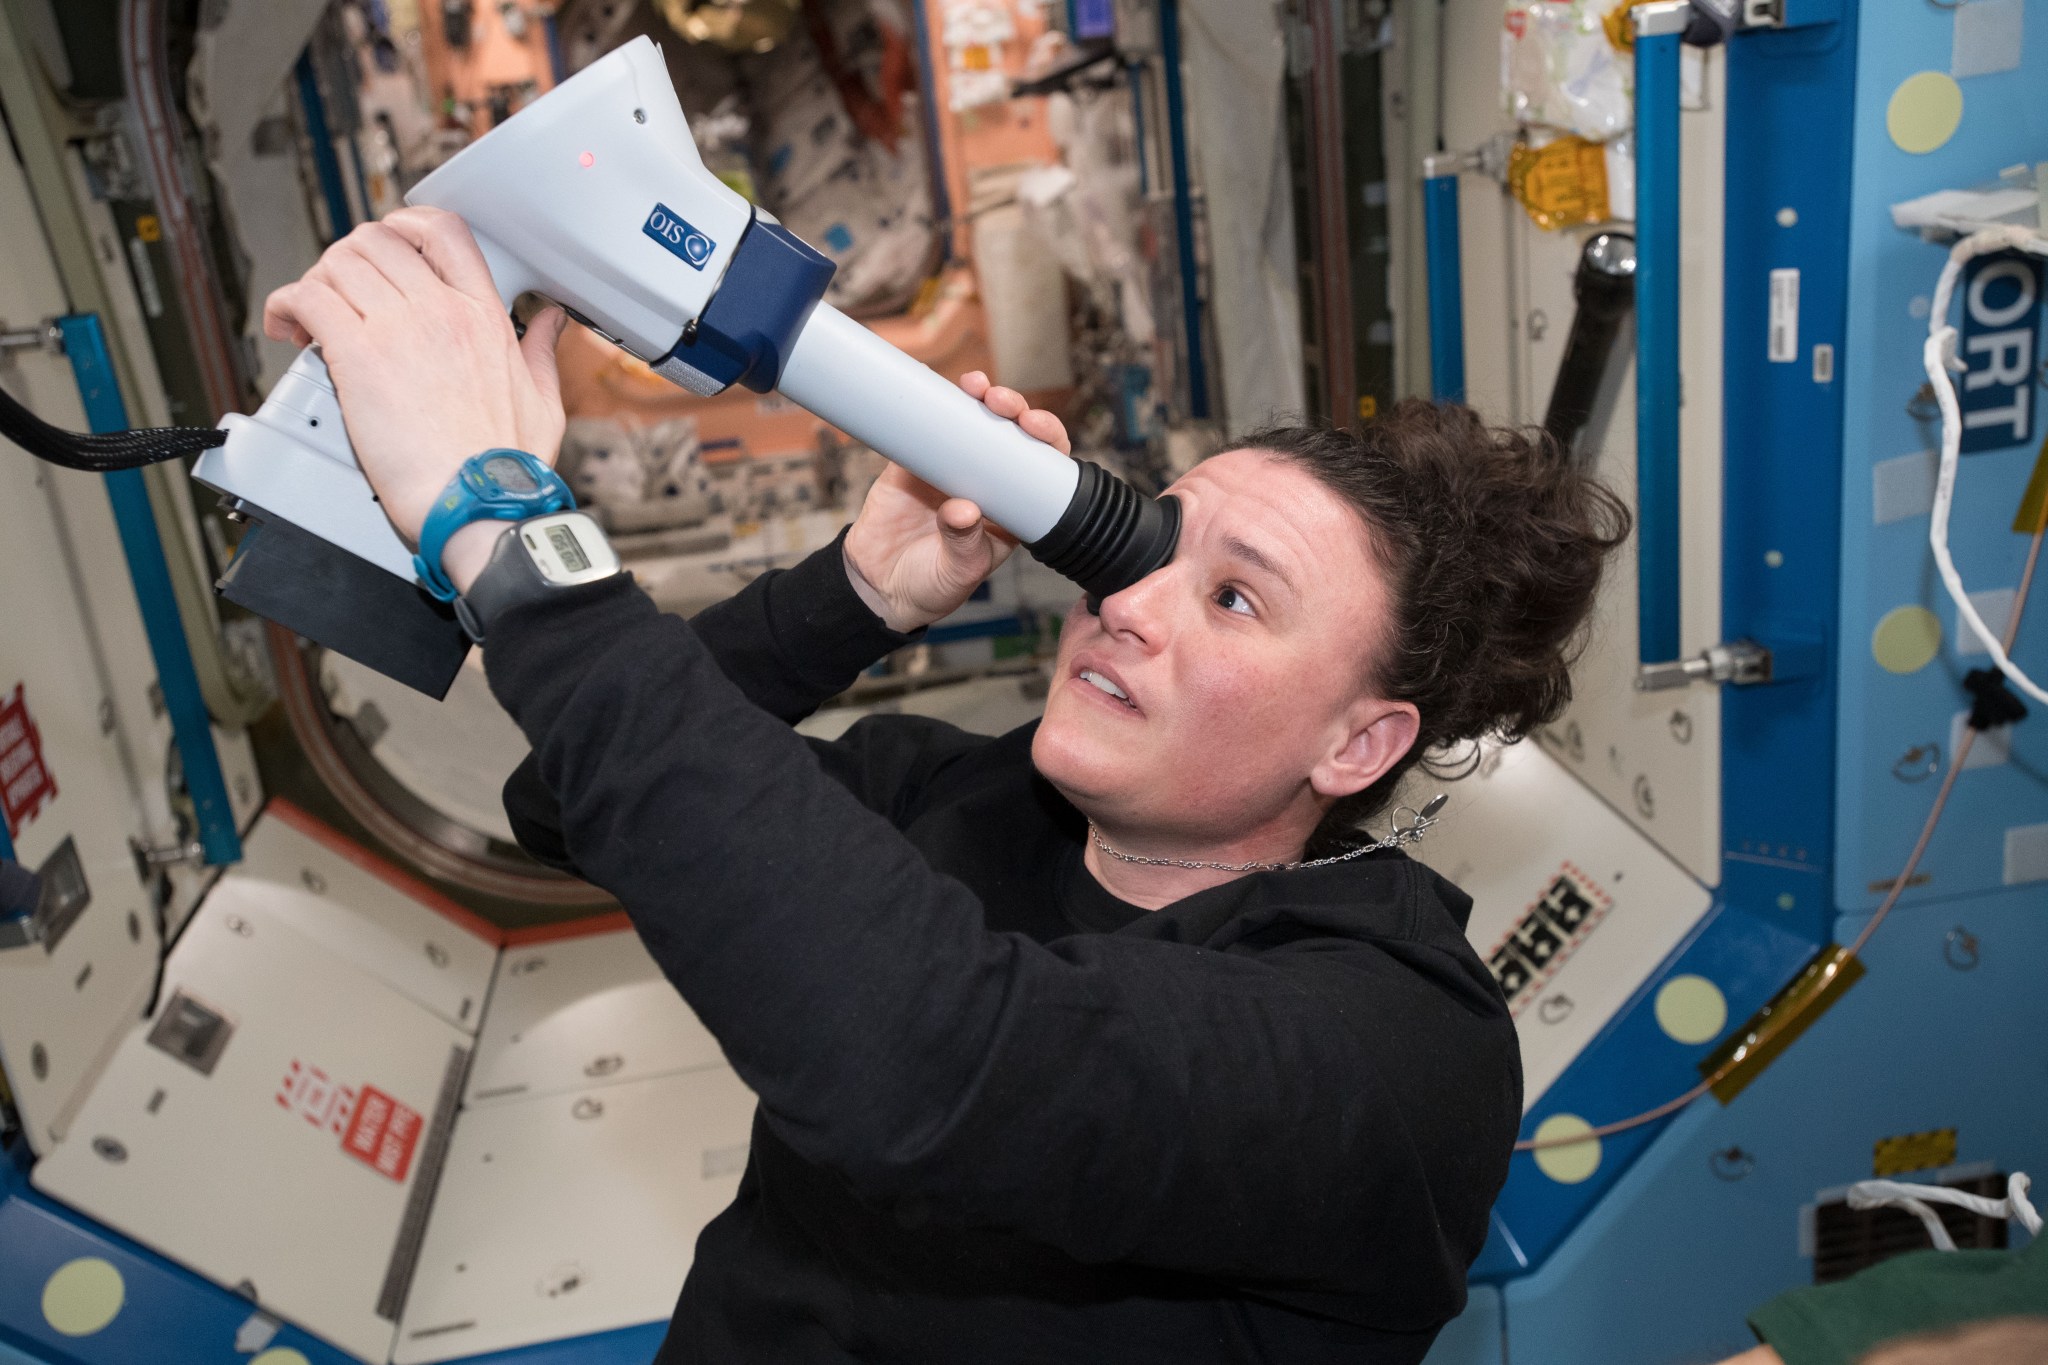 NASA astronaut Serena Auñón-Chancellor uses an instrument called a fundoscope to examine the interior structures of her eye 